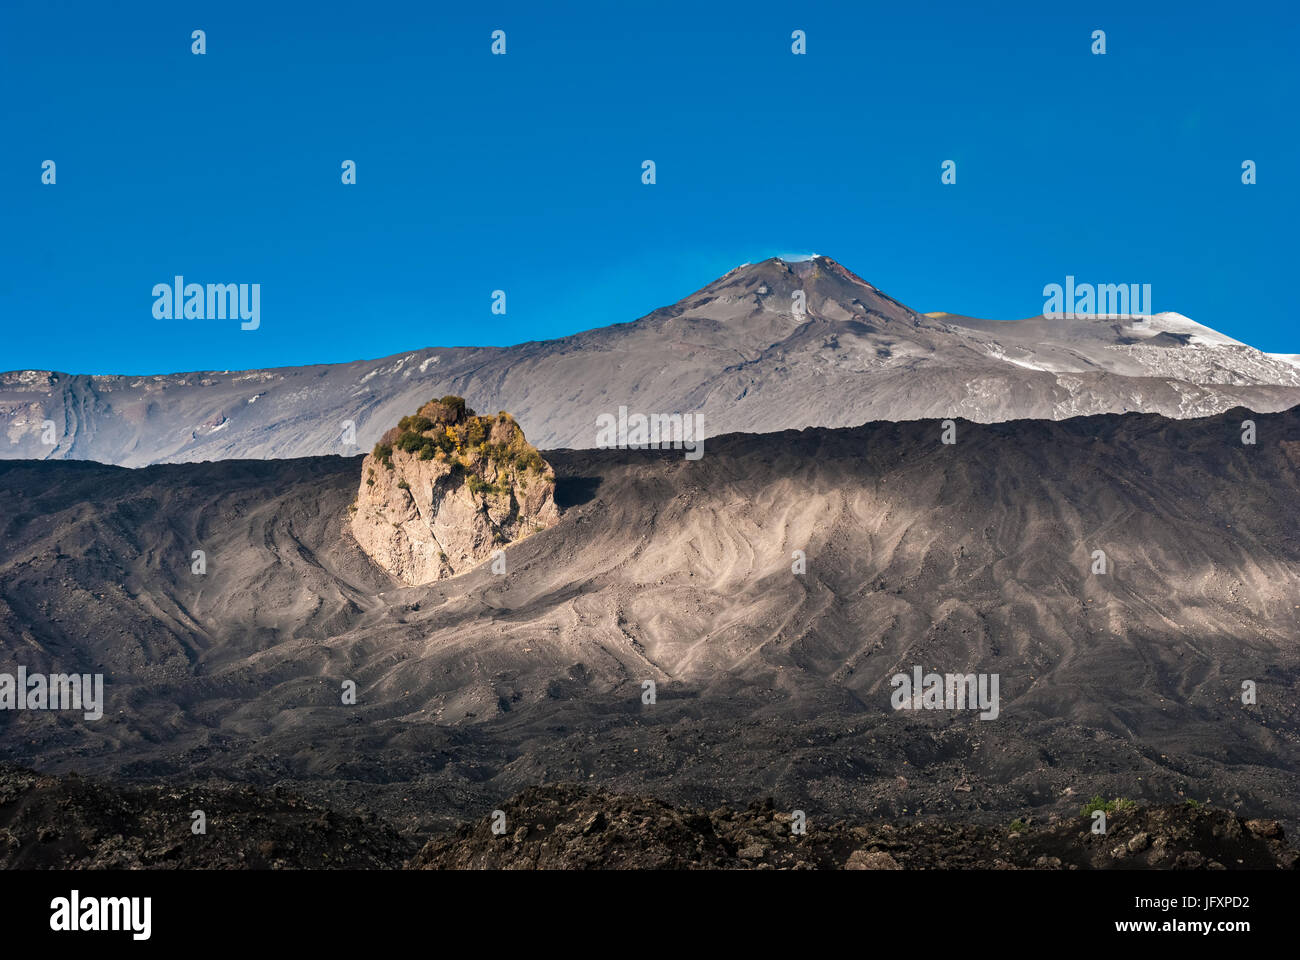 Summit craters of volcano Etna seen from the eastern flank Stock Photo